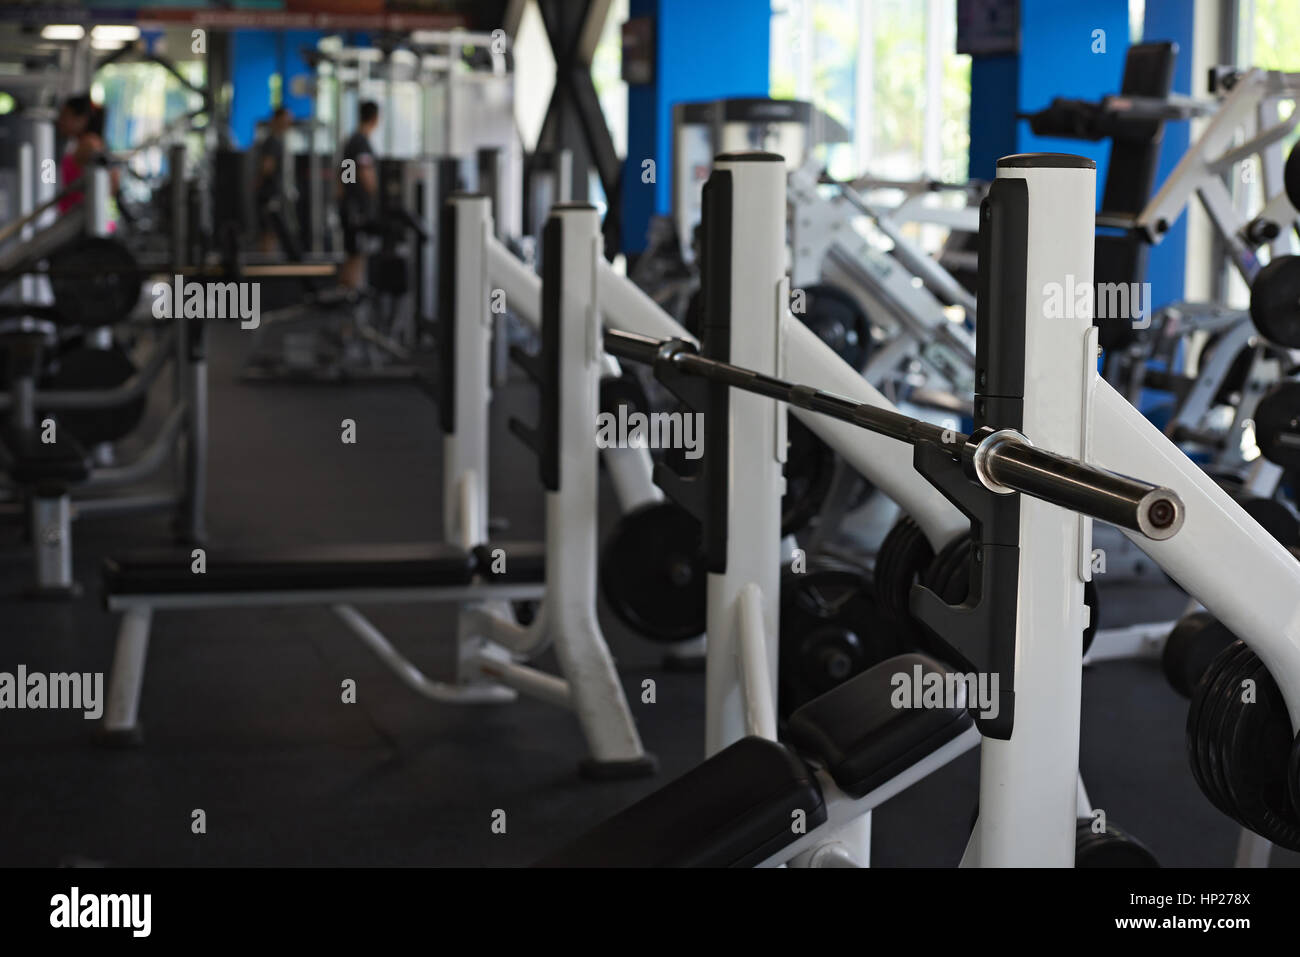 Gym with big windows and heavy weight equipment. Modern fitness bright club Stock Photo